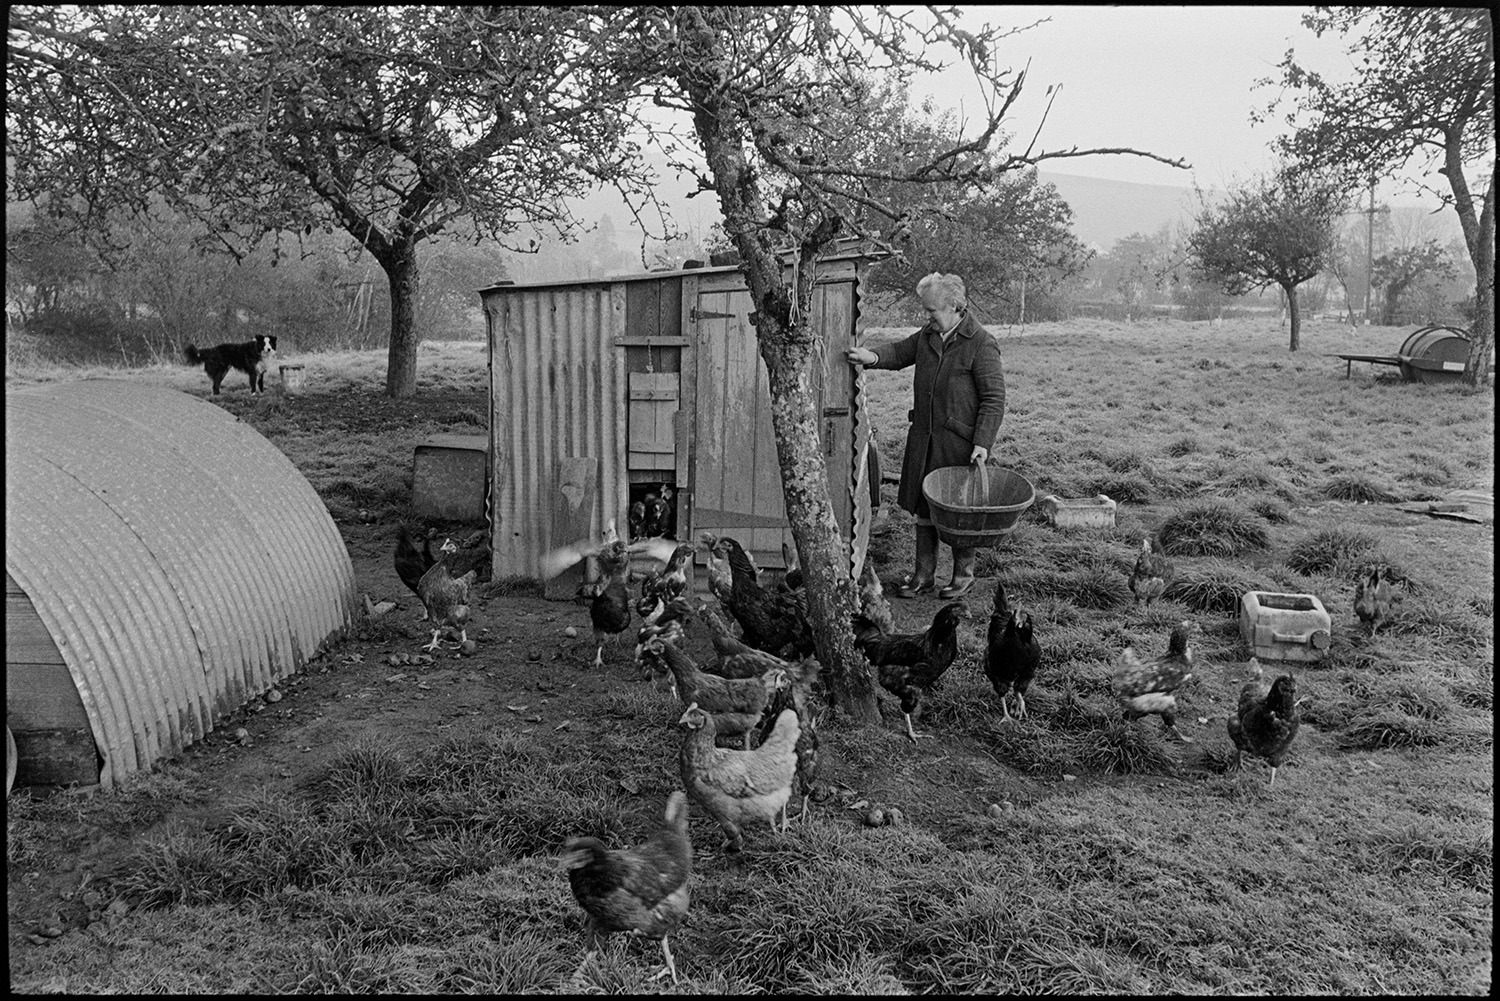 Woman farmer feeding poultry in orchard, dog. 
[A woman feeding chickens in an orchard at Cawseys Meethe, Kings Nympton. Two hen houses are visible with a stone water trough. A dog can also be seen in the background.]